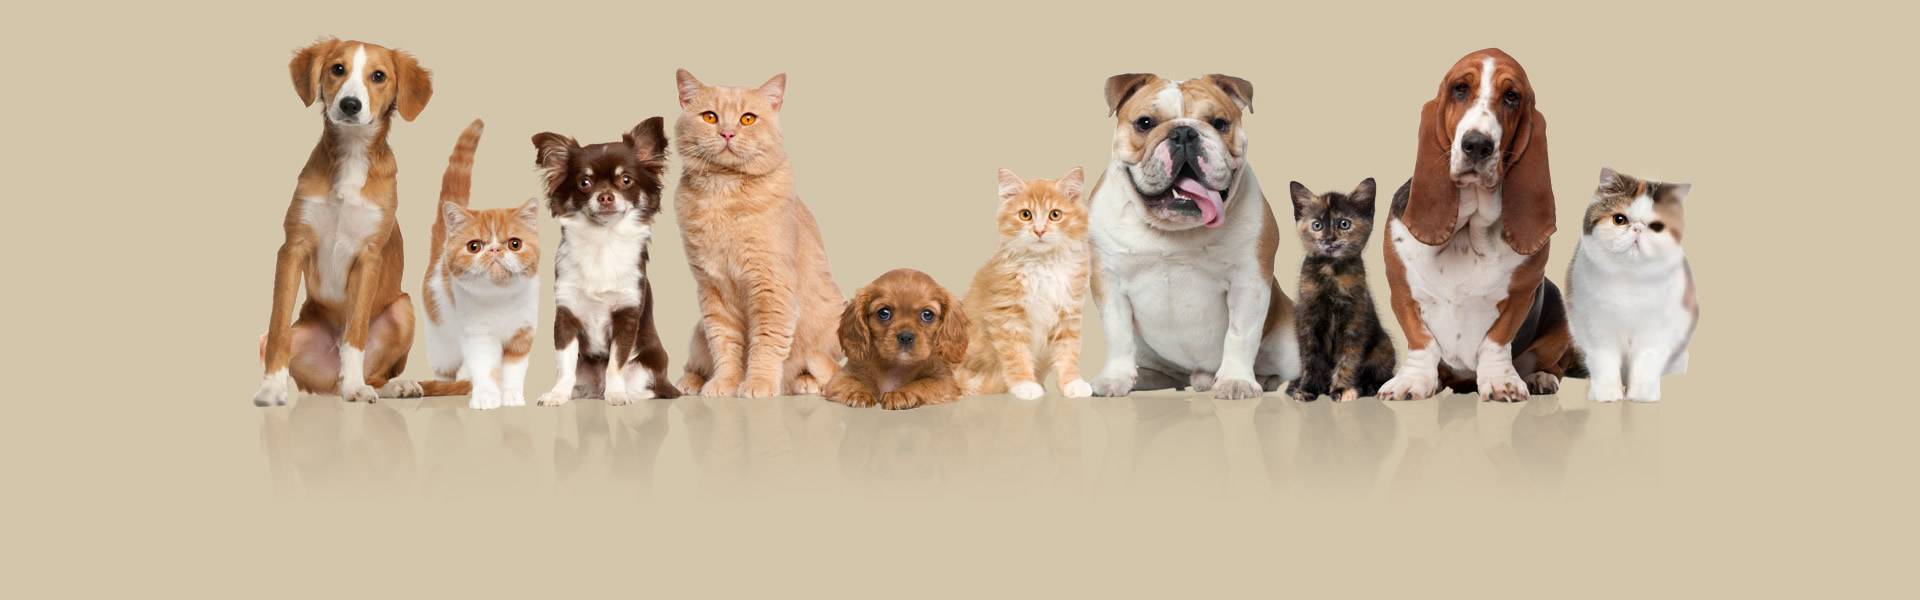 Several different dogs and cats on brown background